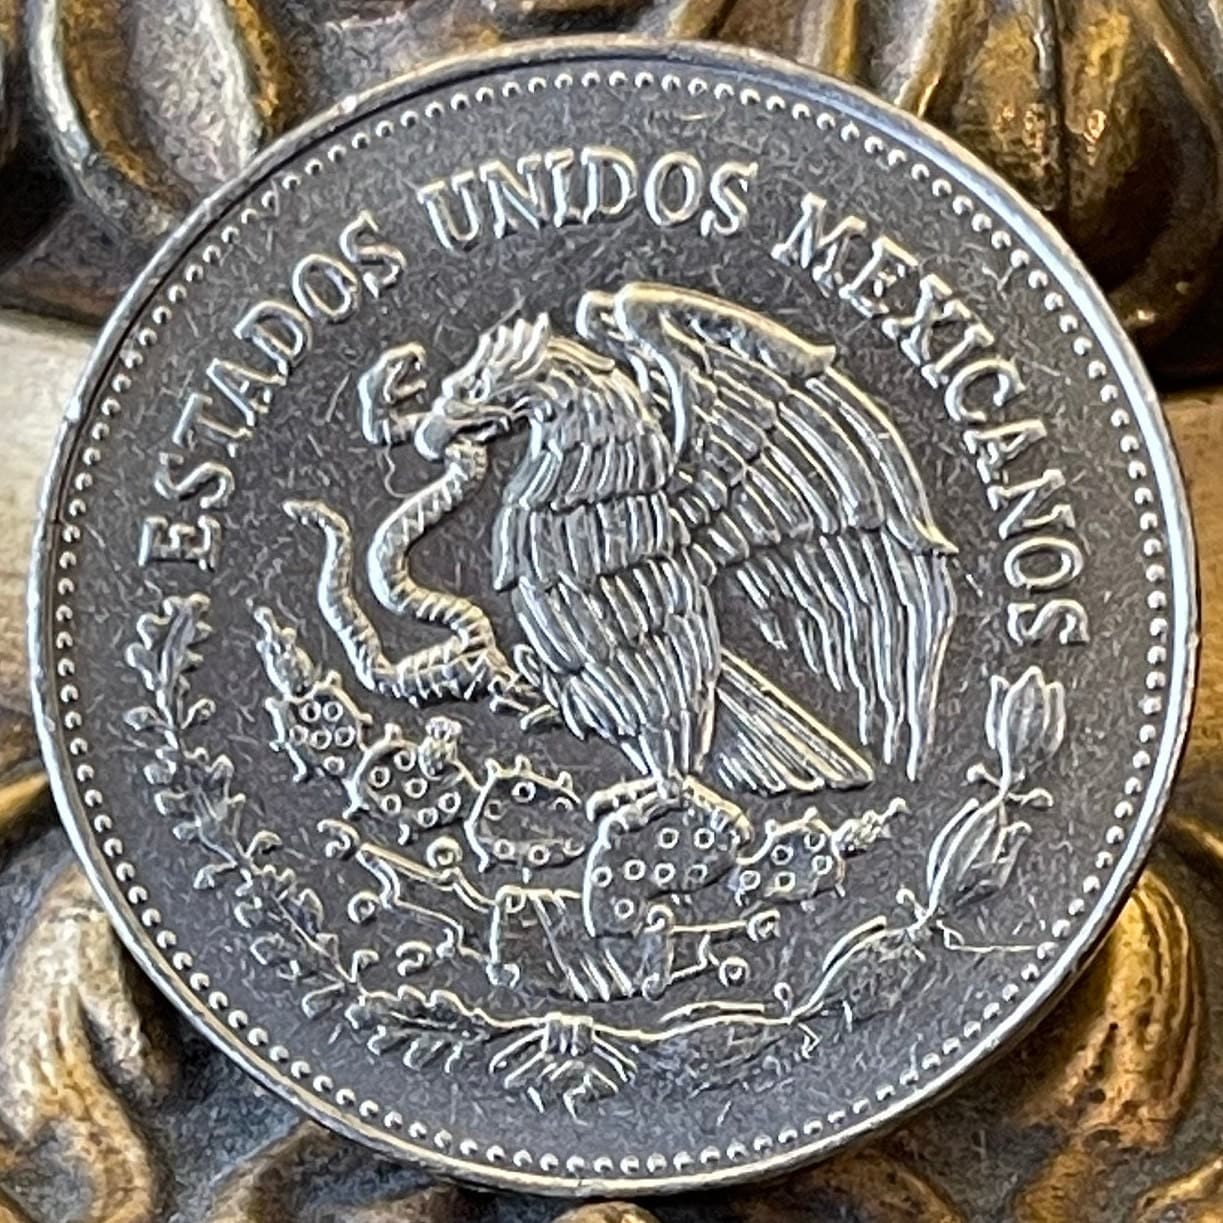 Angel and Heroes of Independence 200 Pesos Mexico Authentic Coin Money for Jewelry (Mexican Revolution) (1985) (Independence Monument)